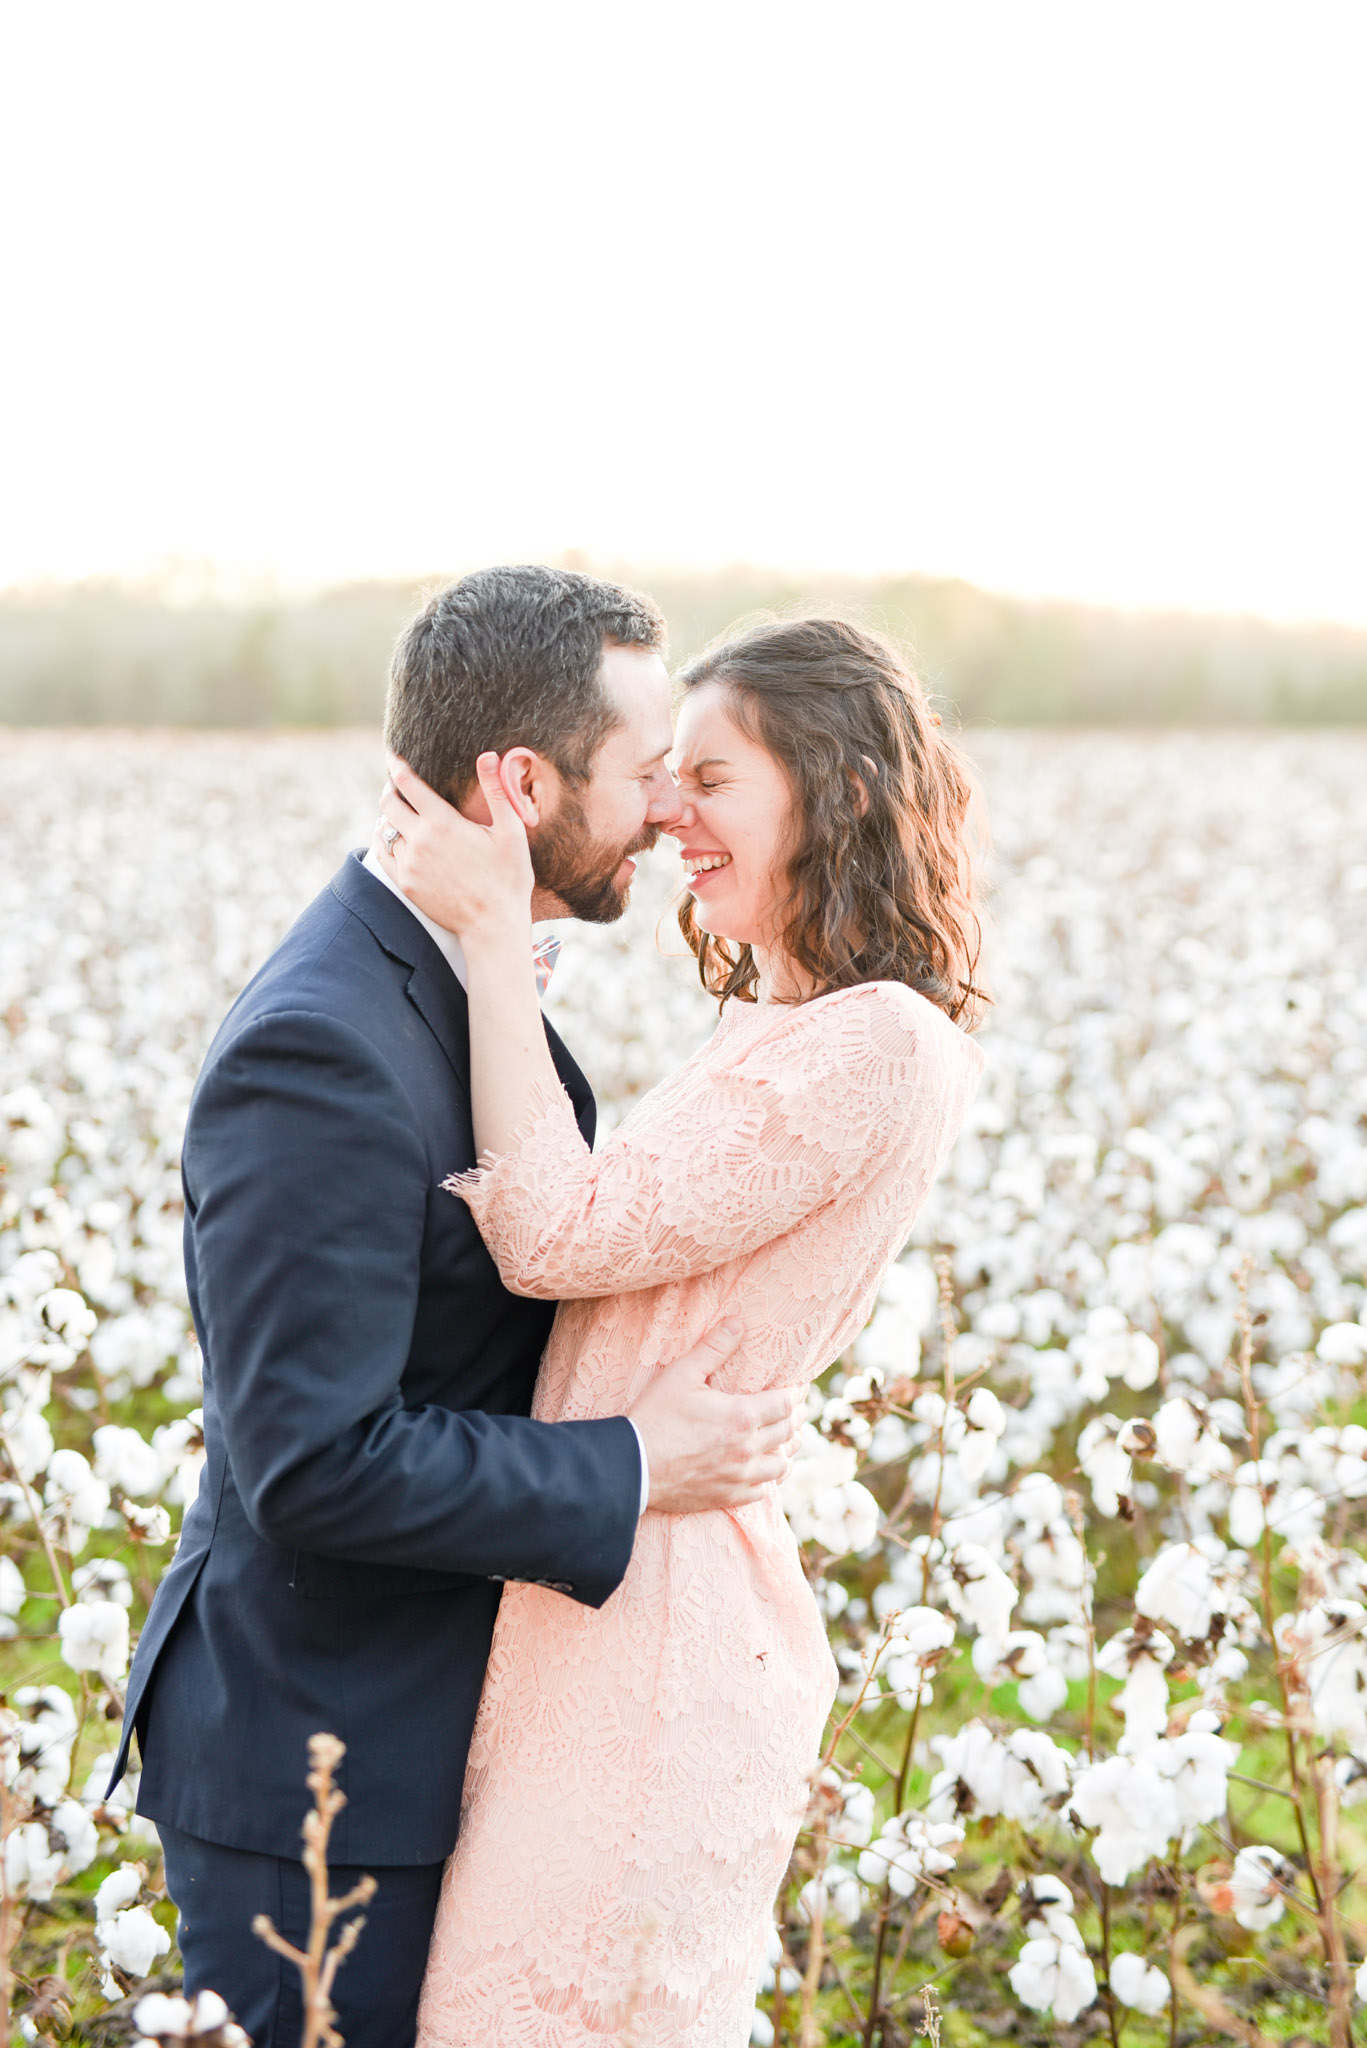 Couple laughs at sunset in cotton field.